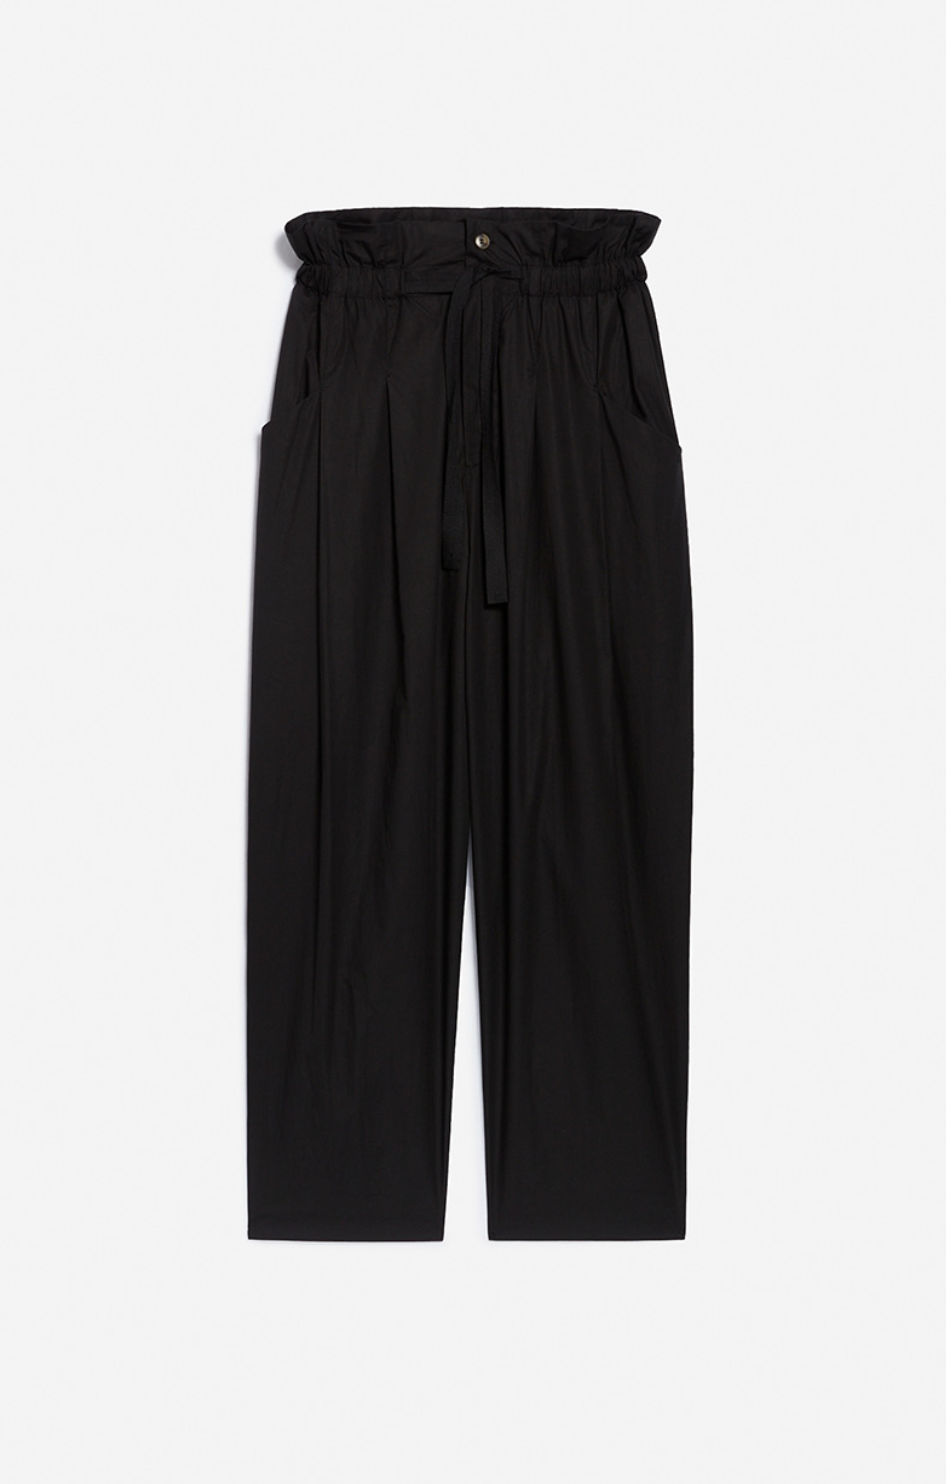 Vanessa Bruno - Casimir Black High-Waisted Trousers Media 4 of 4